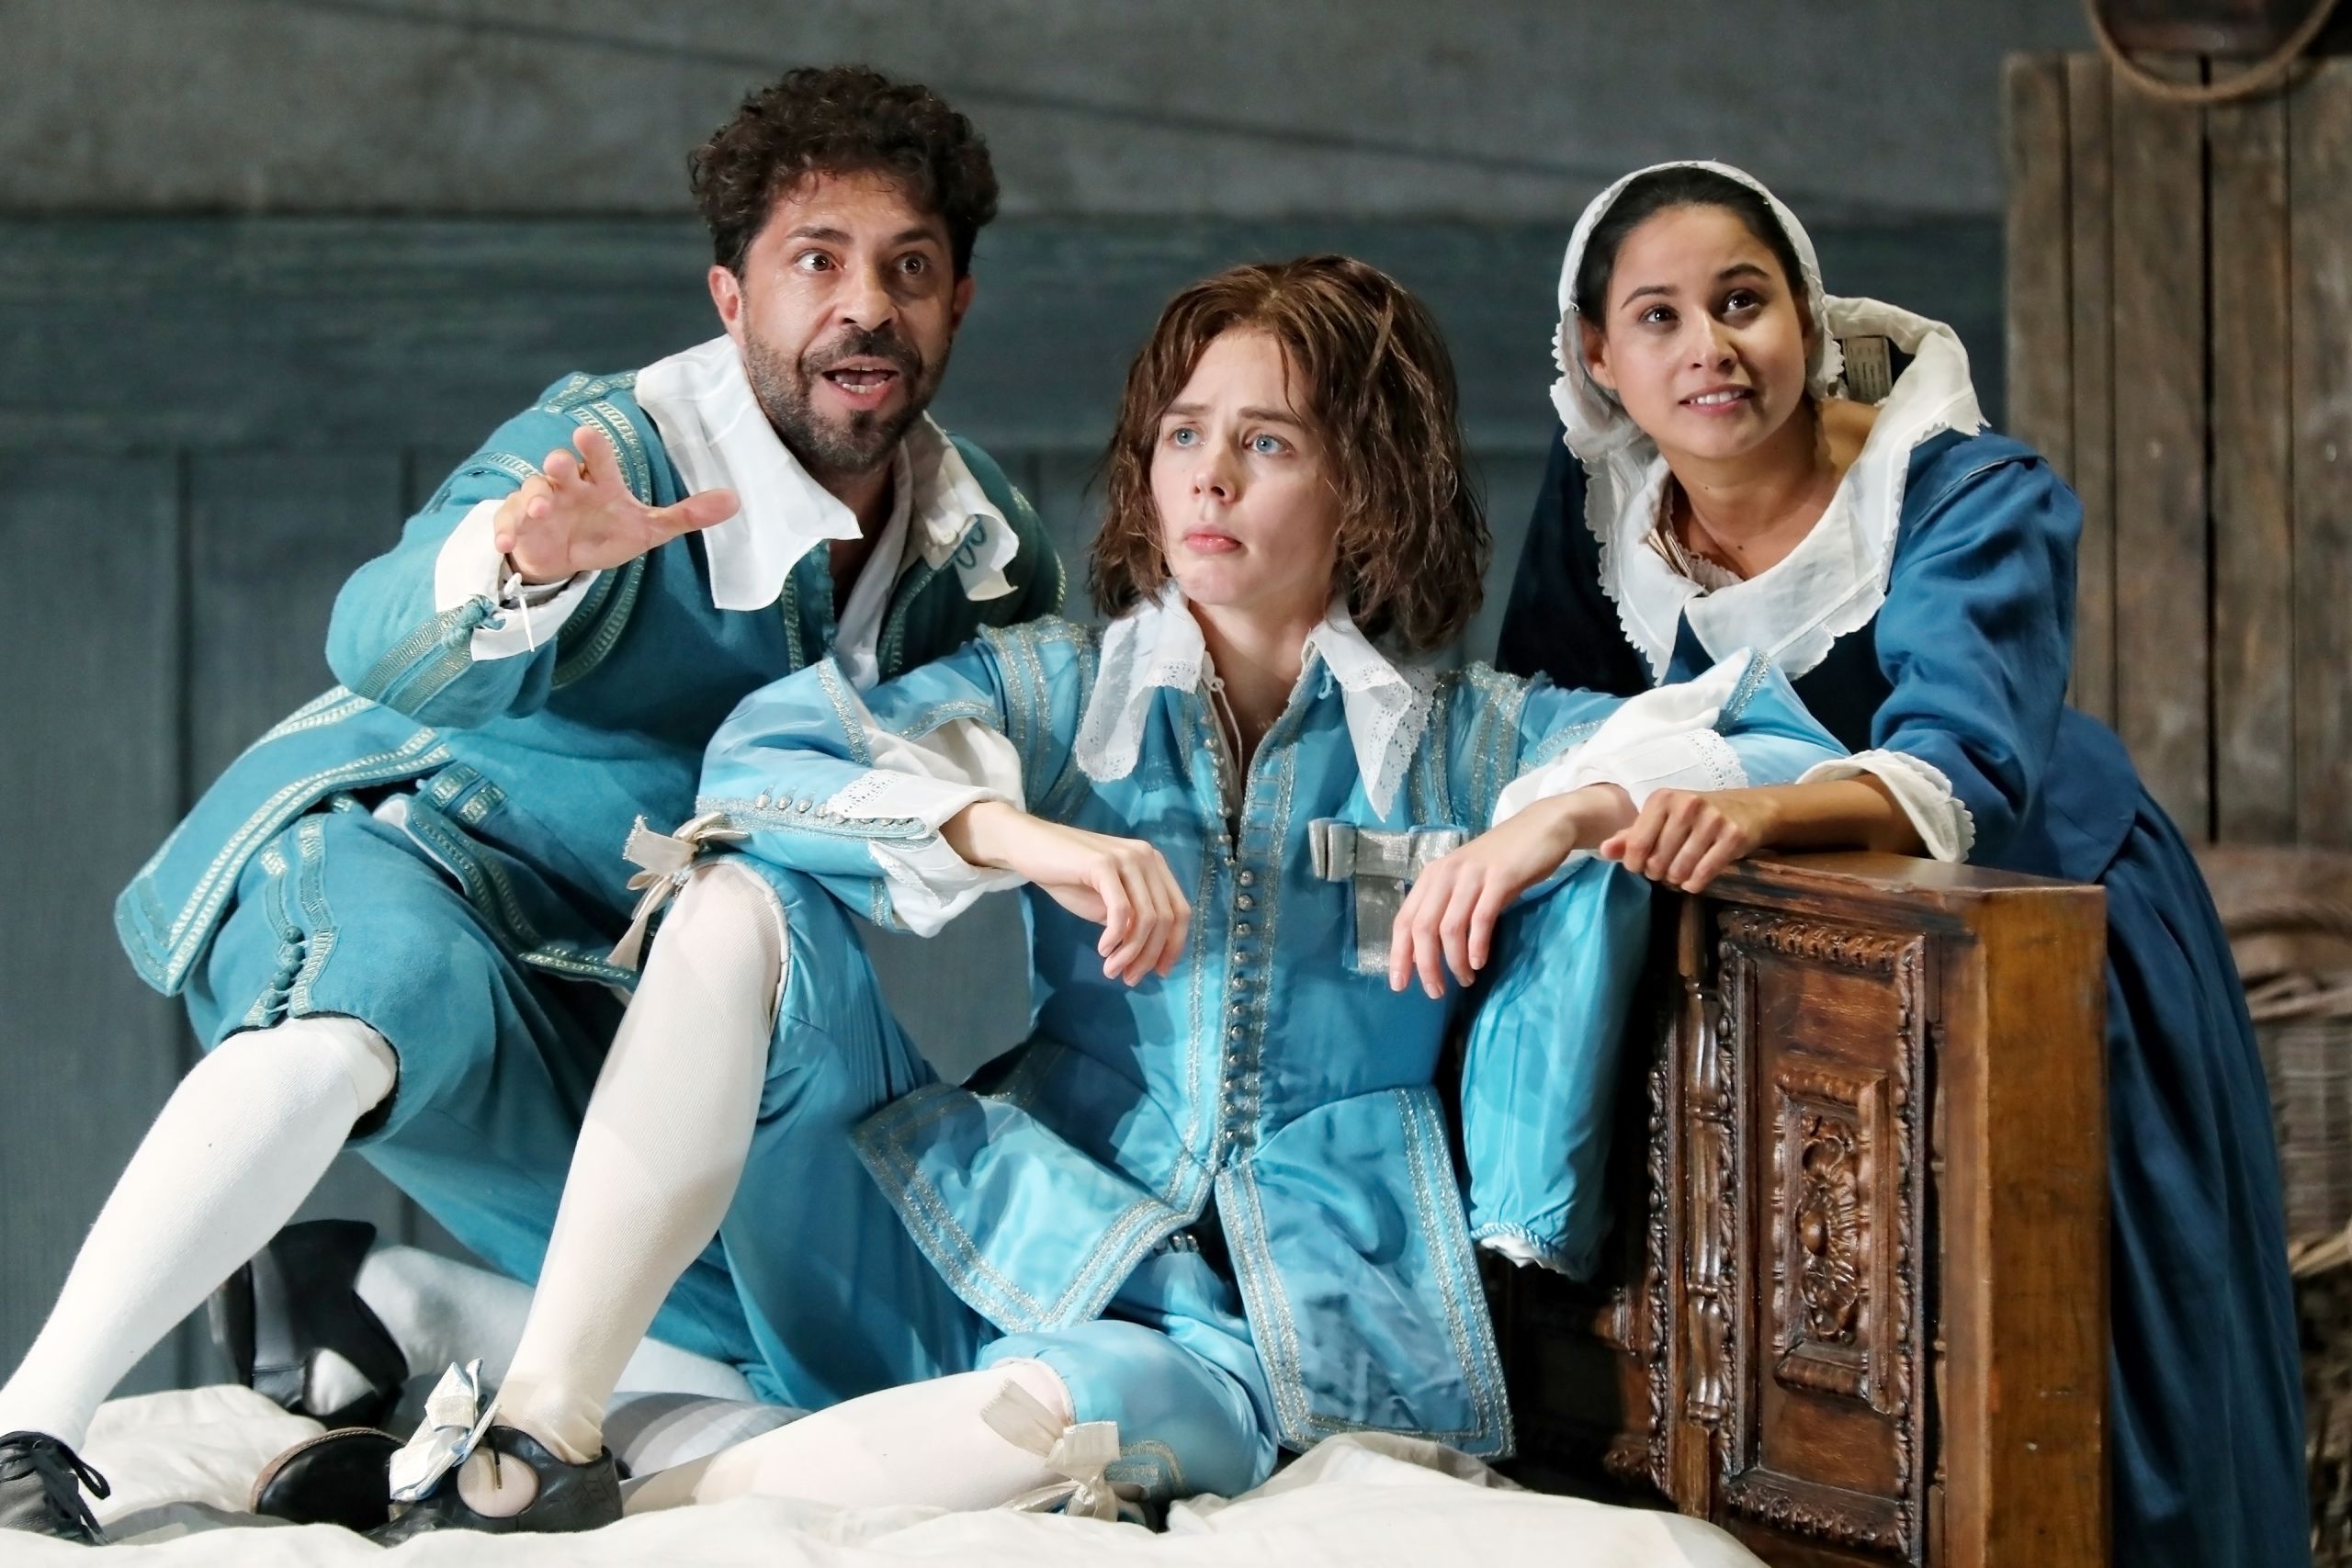 A man and two women sit on stage wearing blue 17th century costumes in a performance of The Marriage of Figaro at the Sydney Opera House.